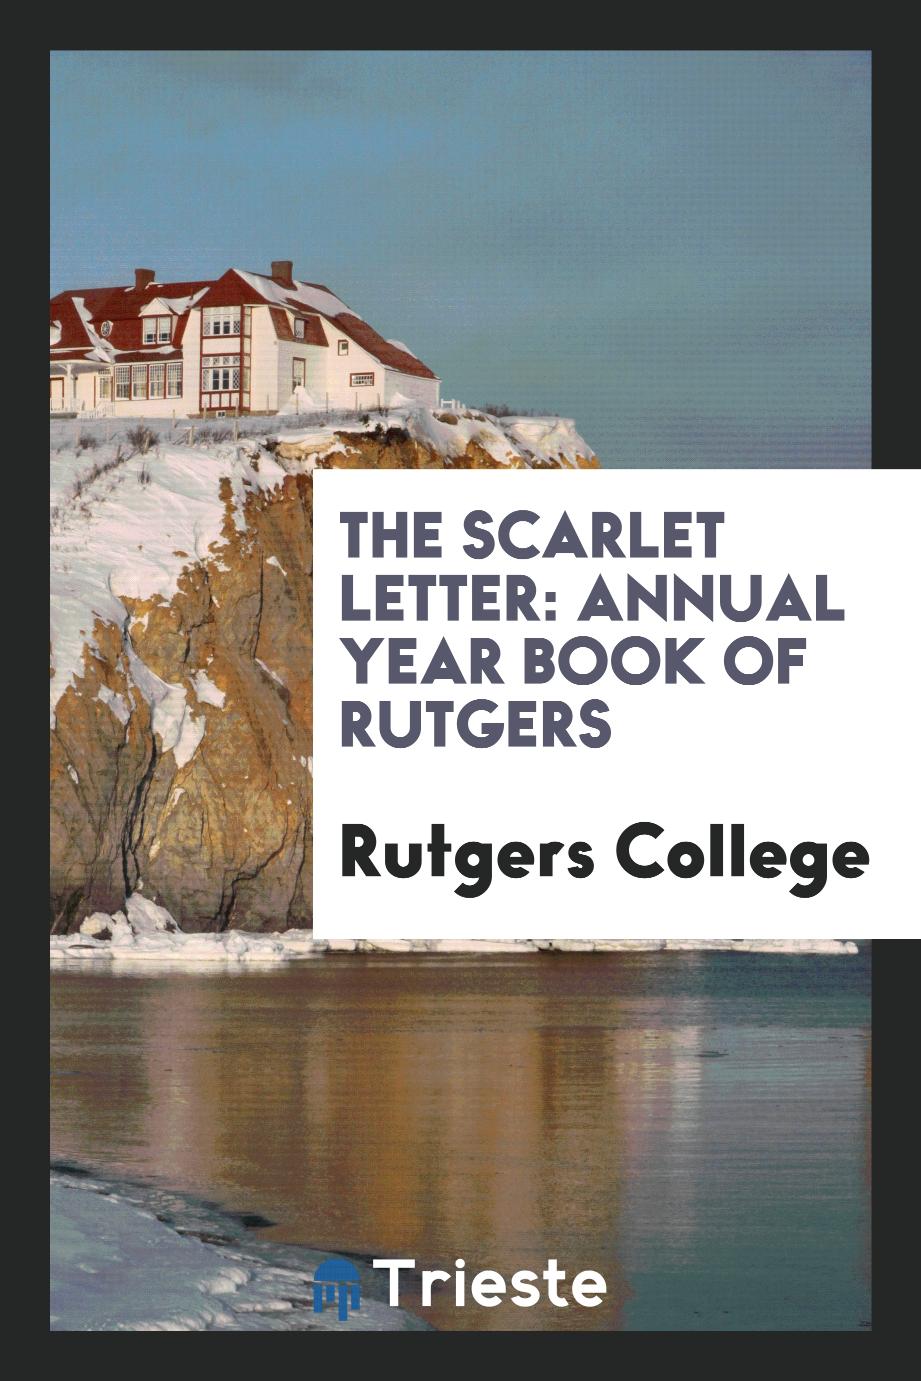 The Scarlet letter: Annual Year Book of Rutgers